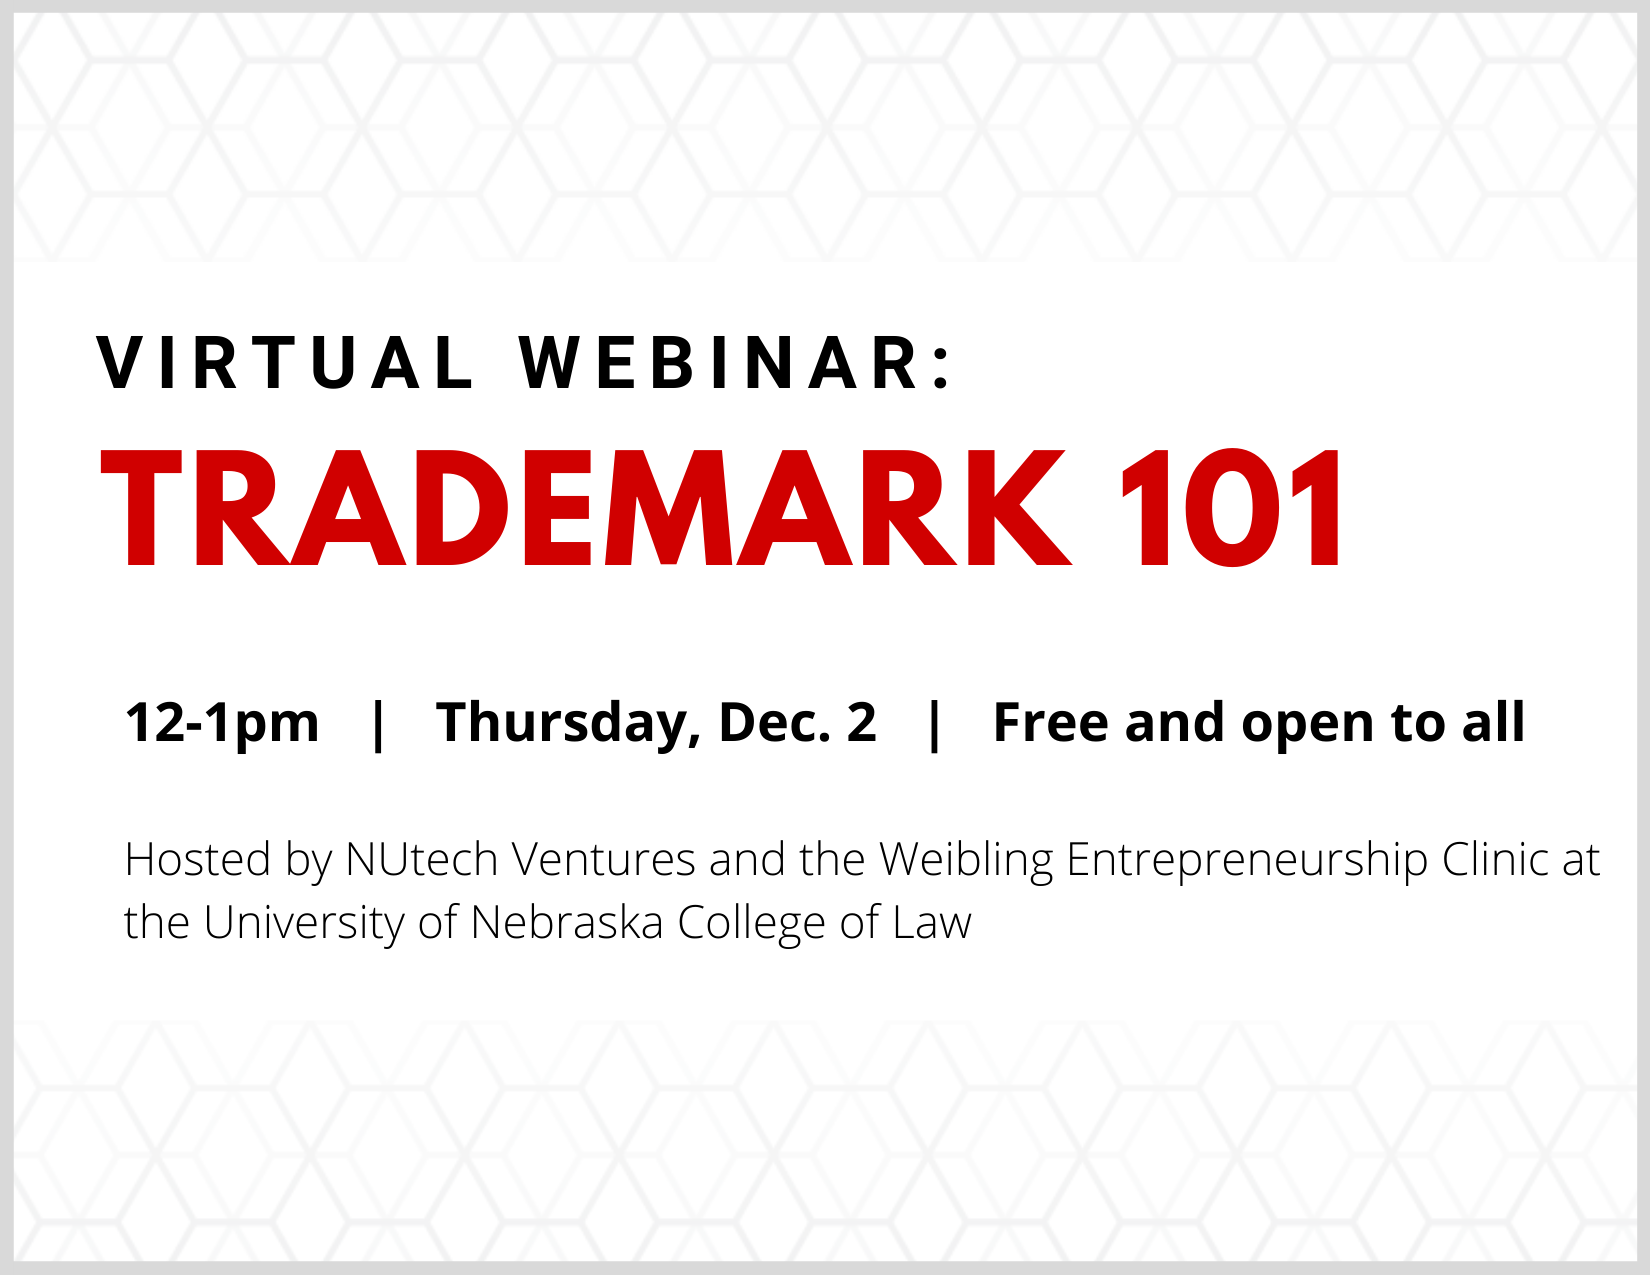 NUtech Ventures and the Weibling Entrepreneurship Clinic at the University of Nebraska College of Law are hosting a webinar, "Trademark 101," on Thursday, December 2, 2021. It is free and open to all faculty, staff, students and community members. 